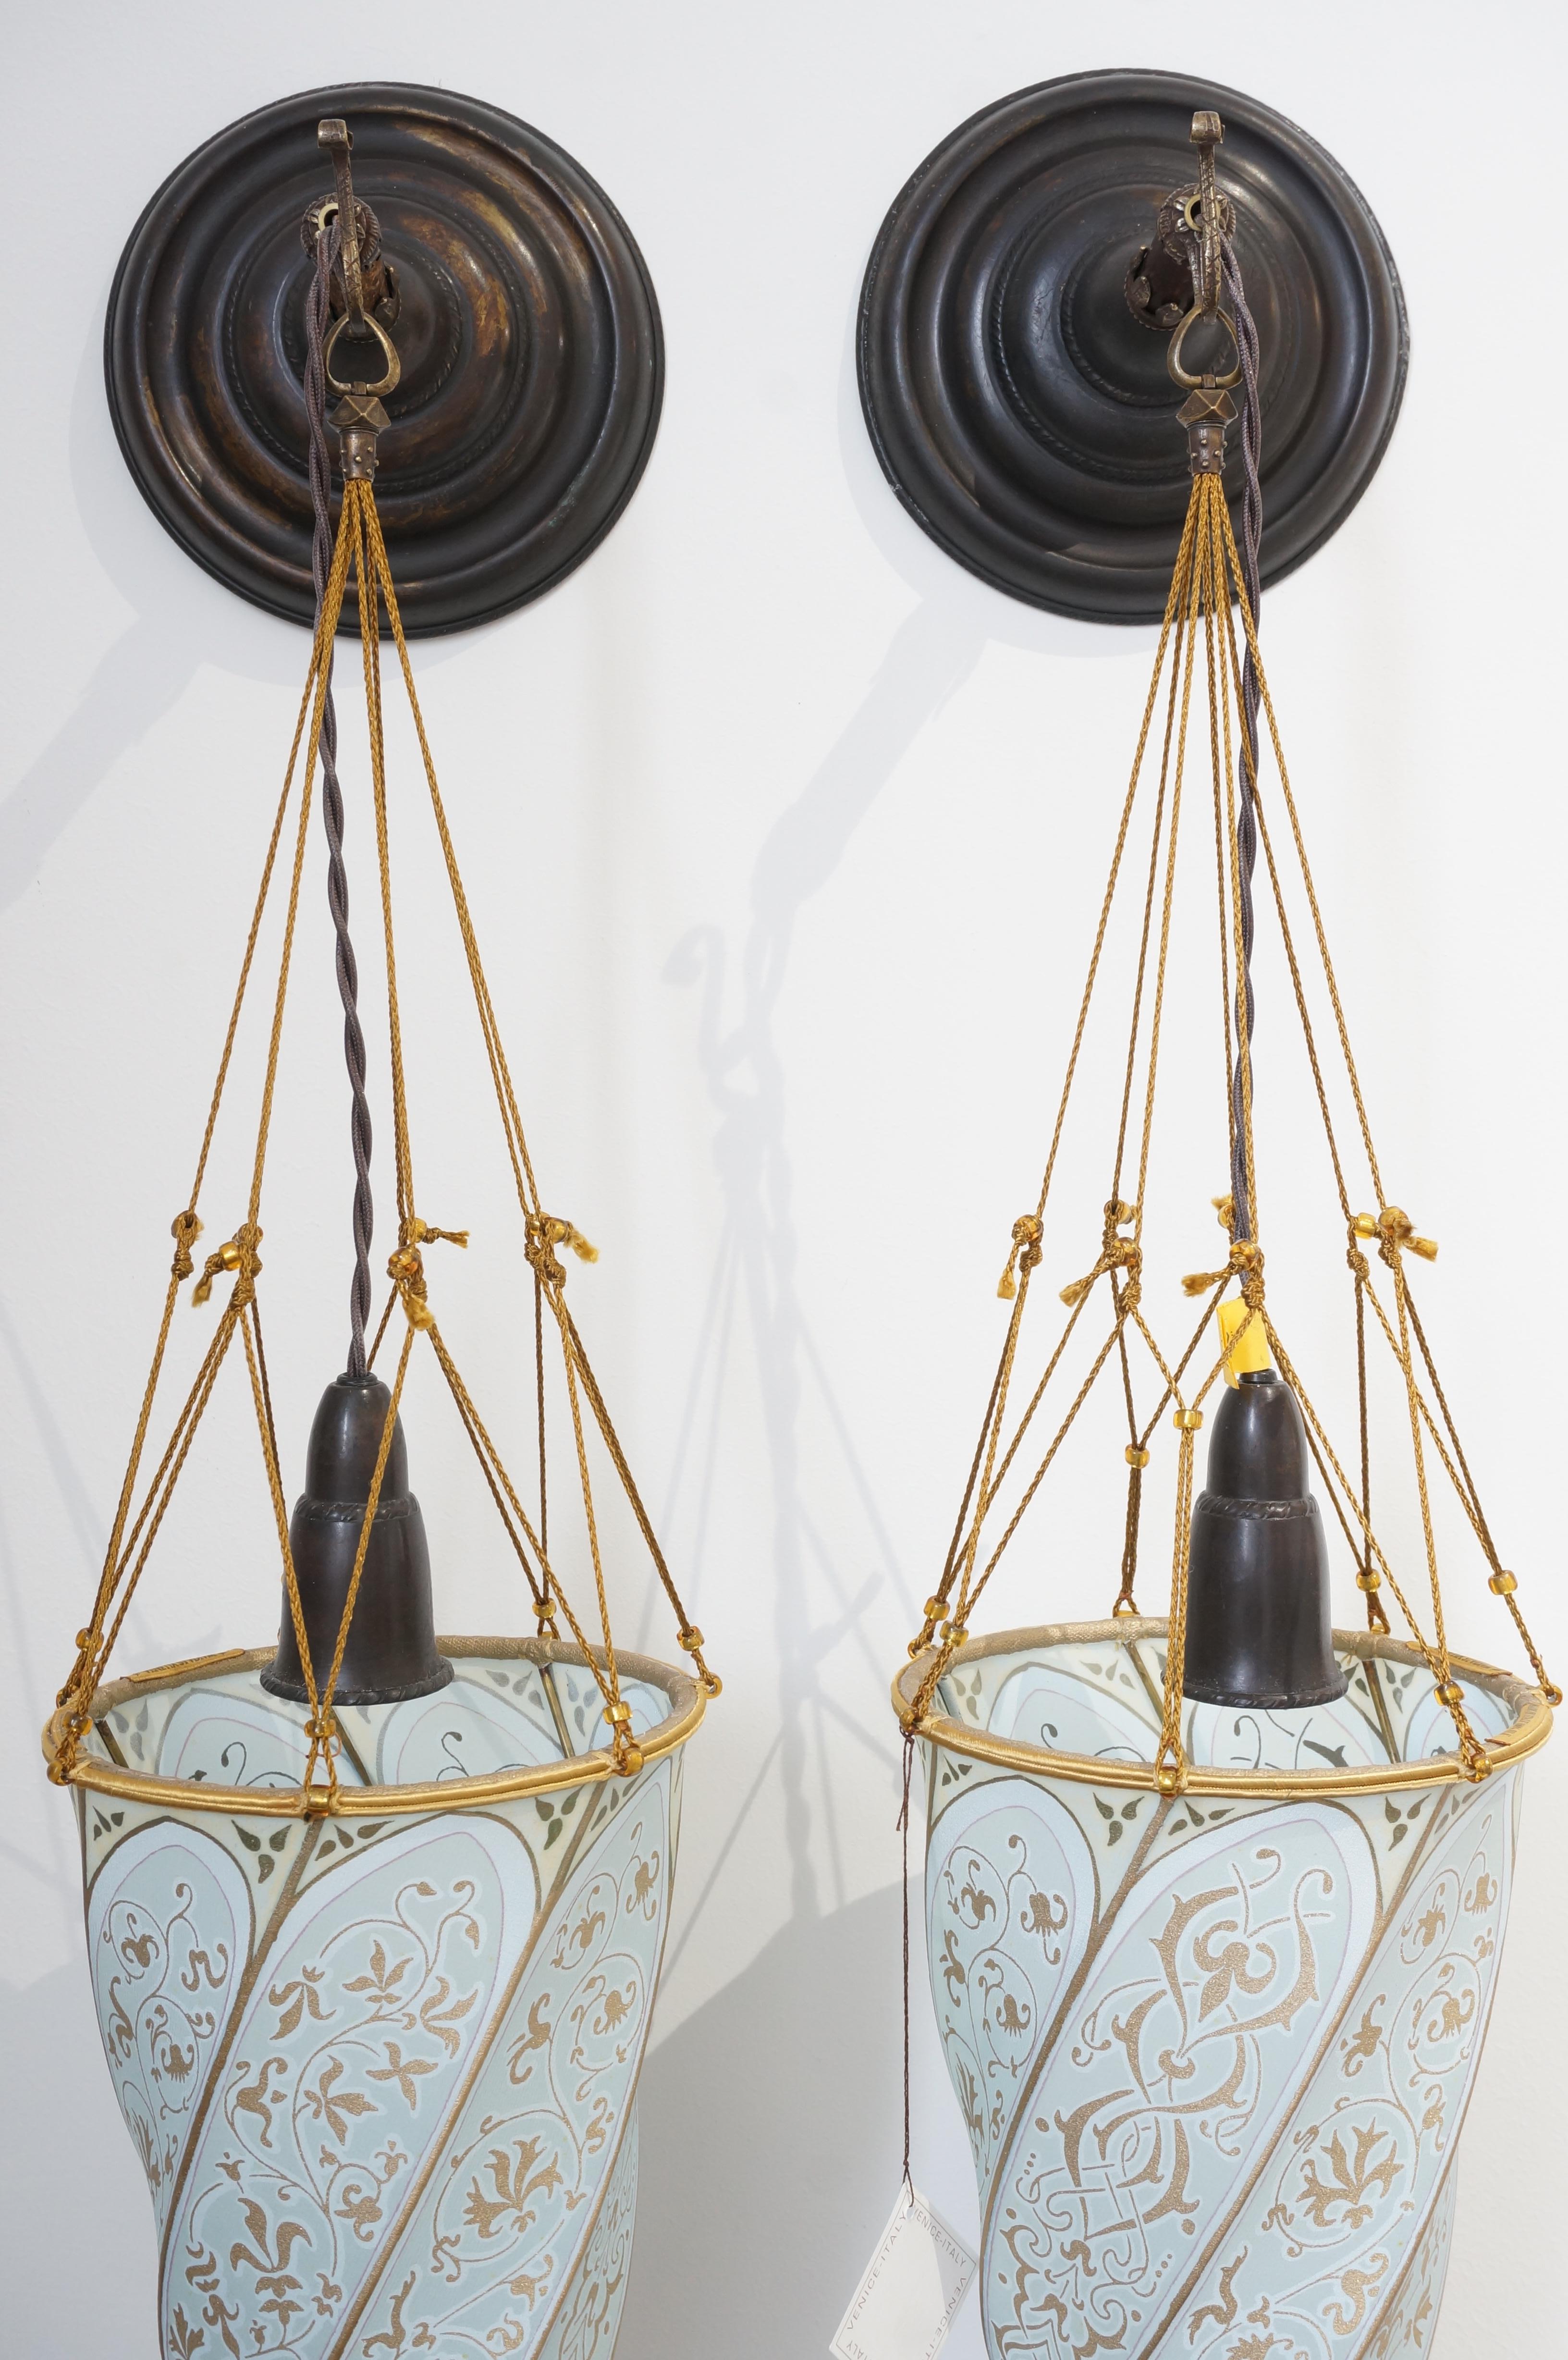 This styiish and chic pair of Forturny silk wall scones will make a subtle statement with their use of materials and form. 

Note: The pieces are new old stock that has never been previously installed.

Note: Each scones requires one candleabra